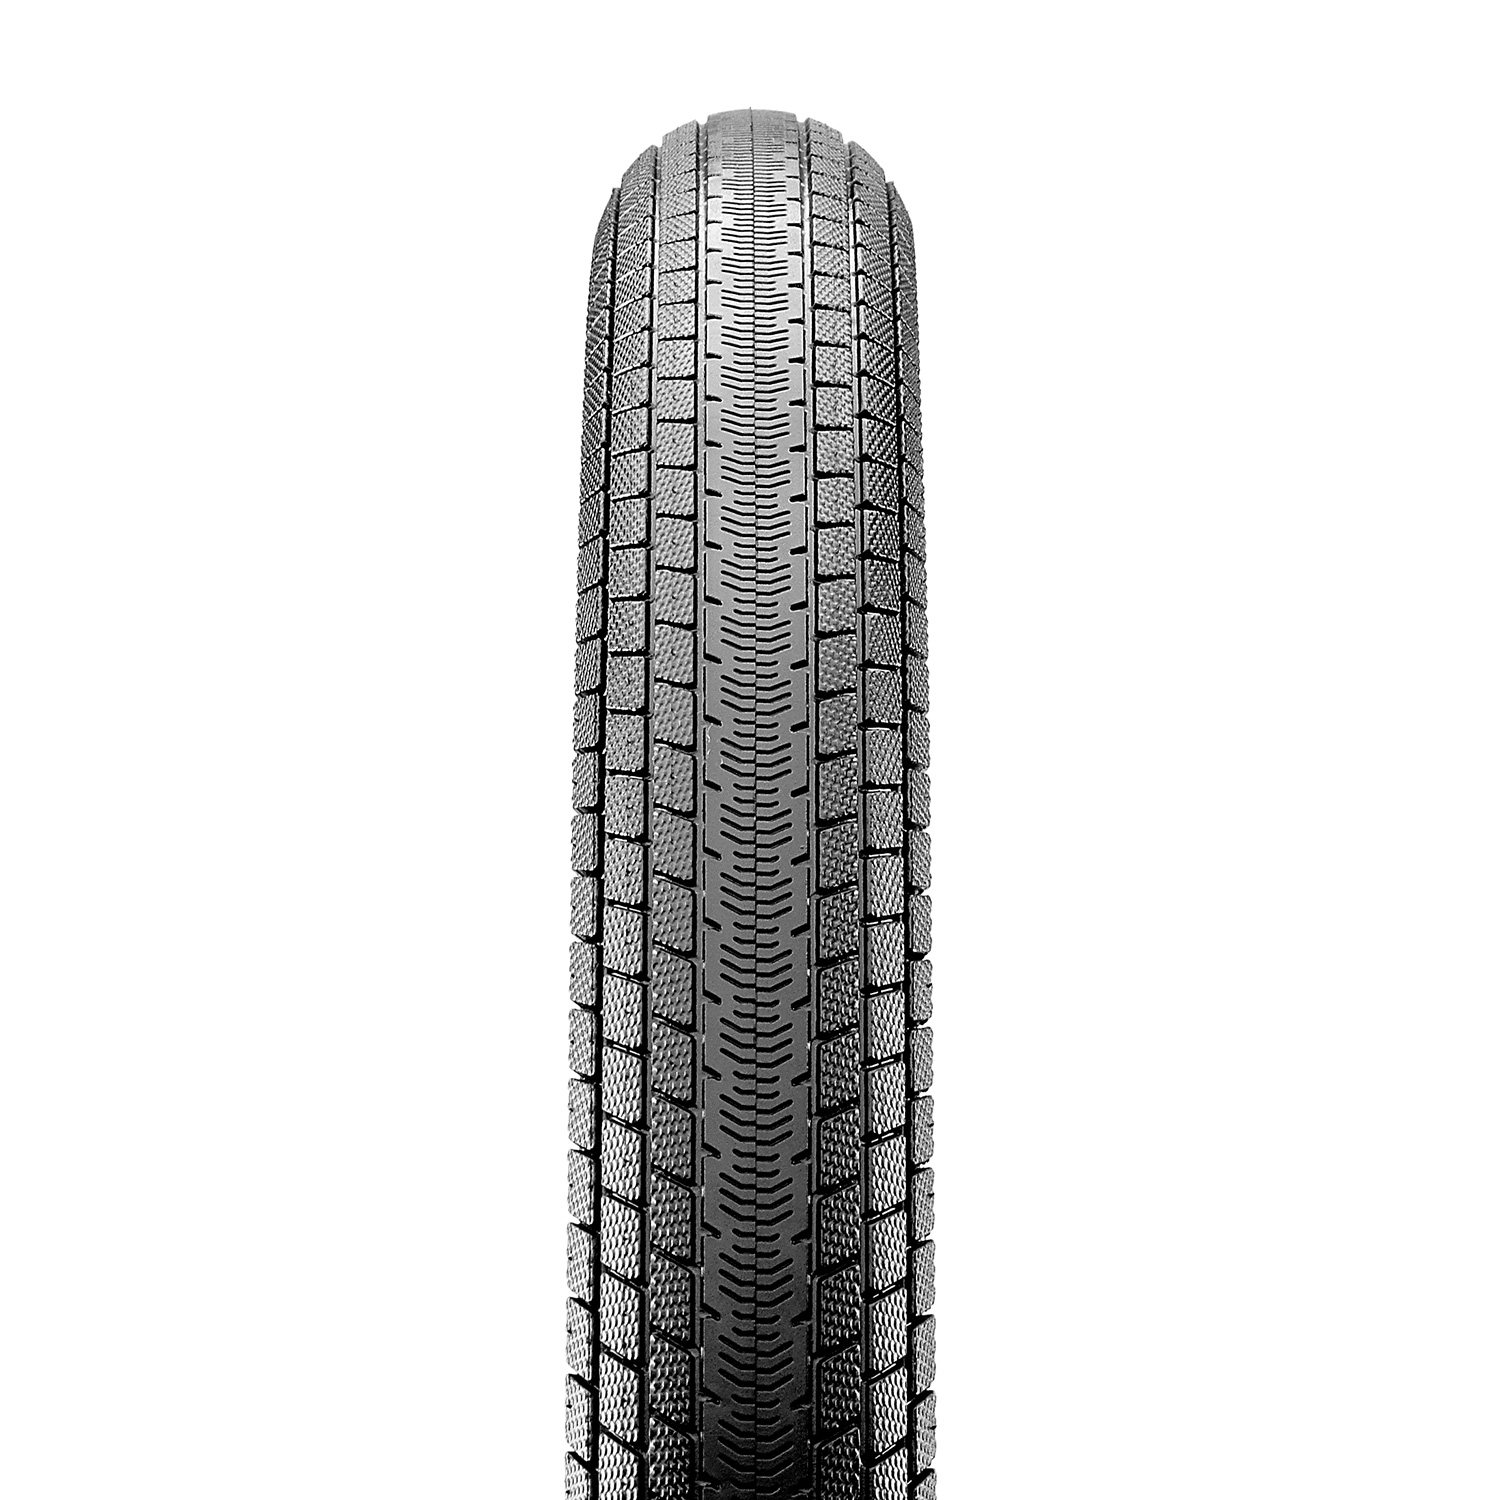 Torch Tyre | BMX Tyres | Cycle Tyres | Maxxis Tyres UK